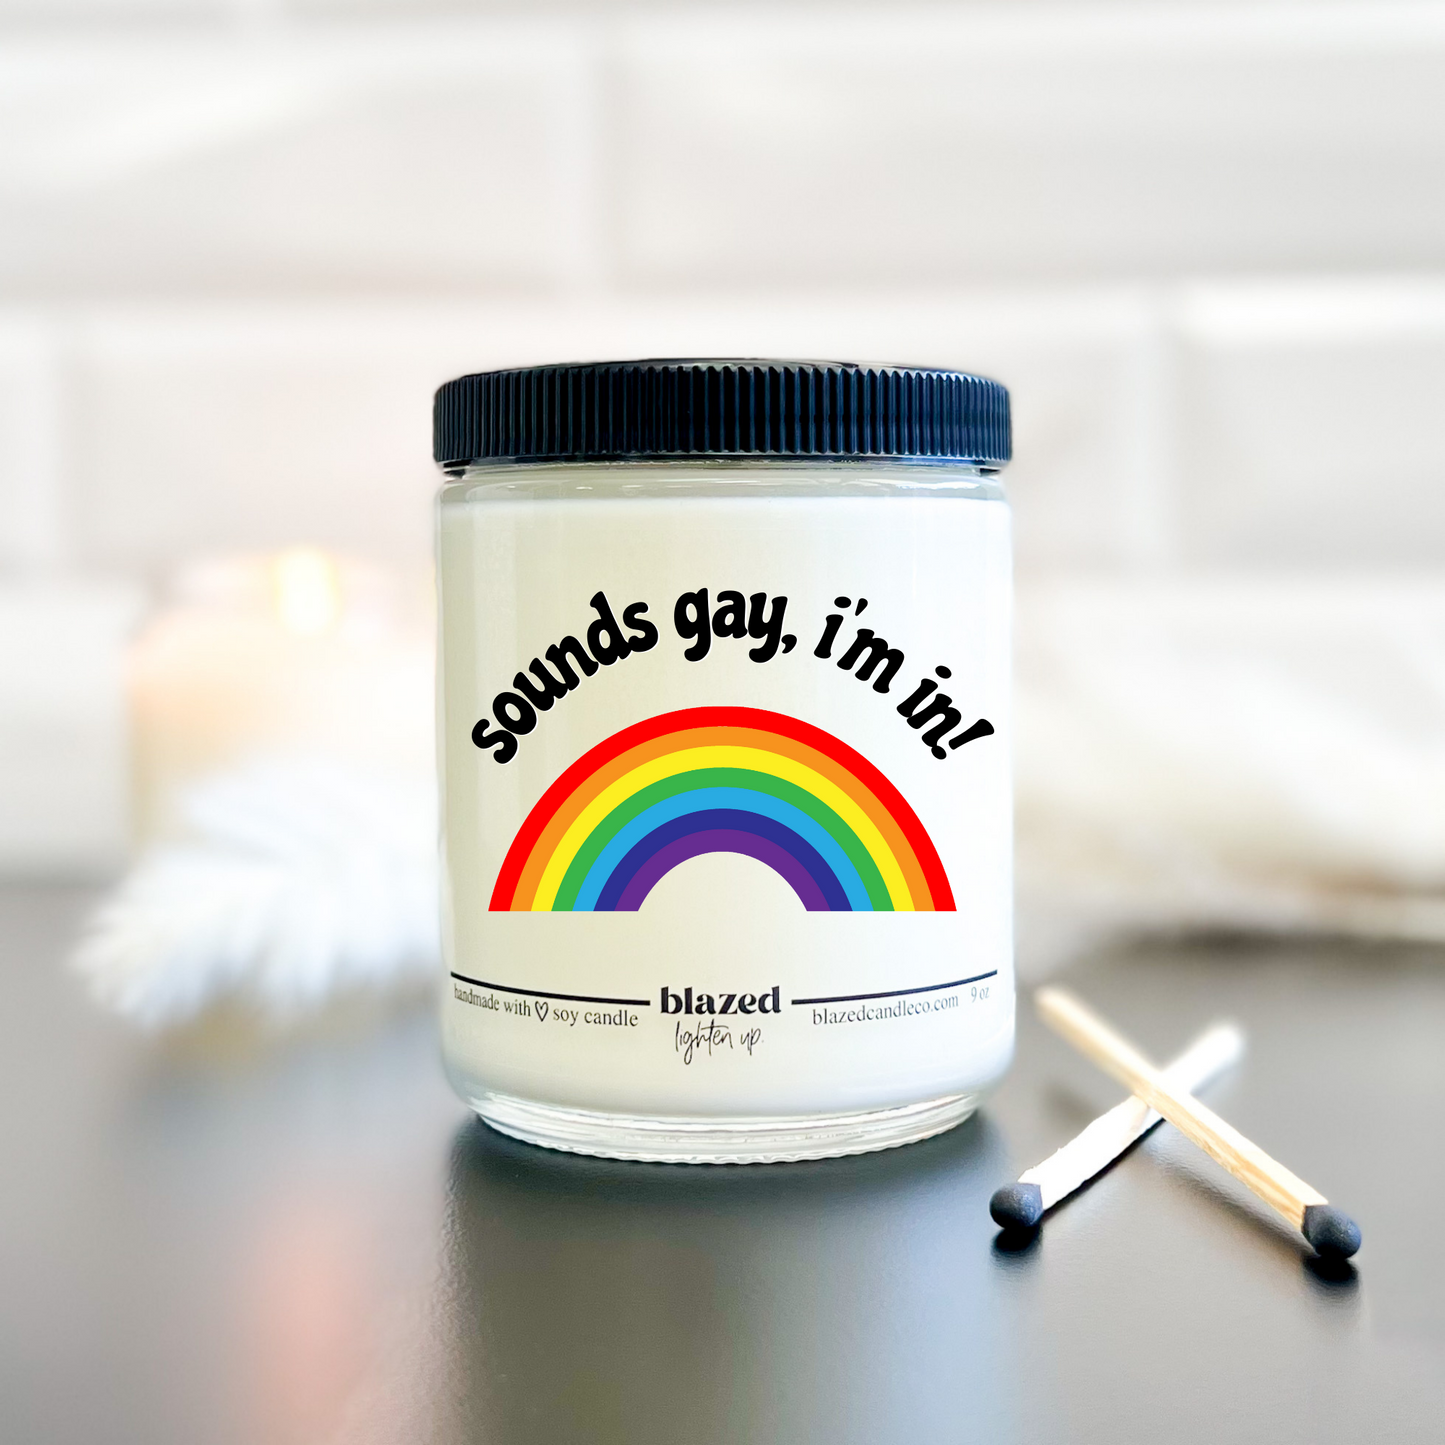 Sounds Gay, I'm In! Candle